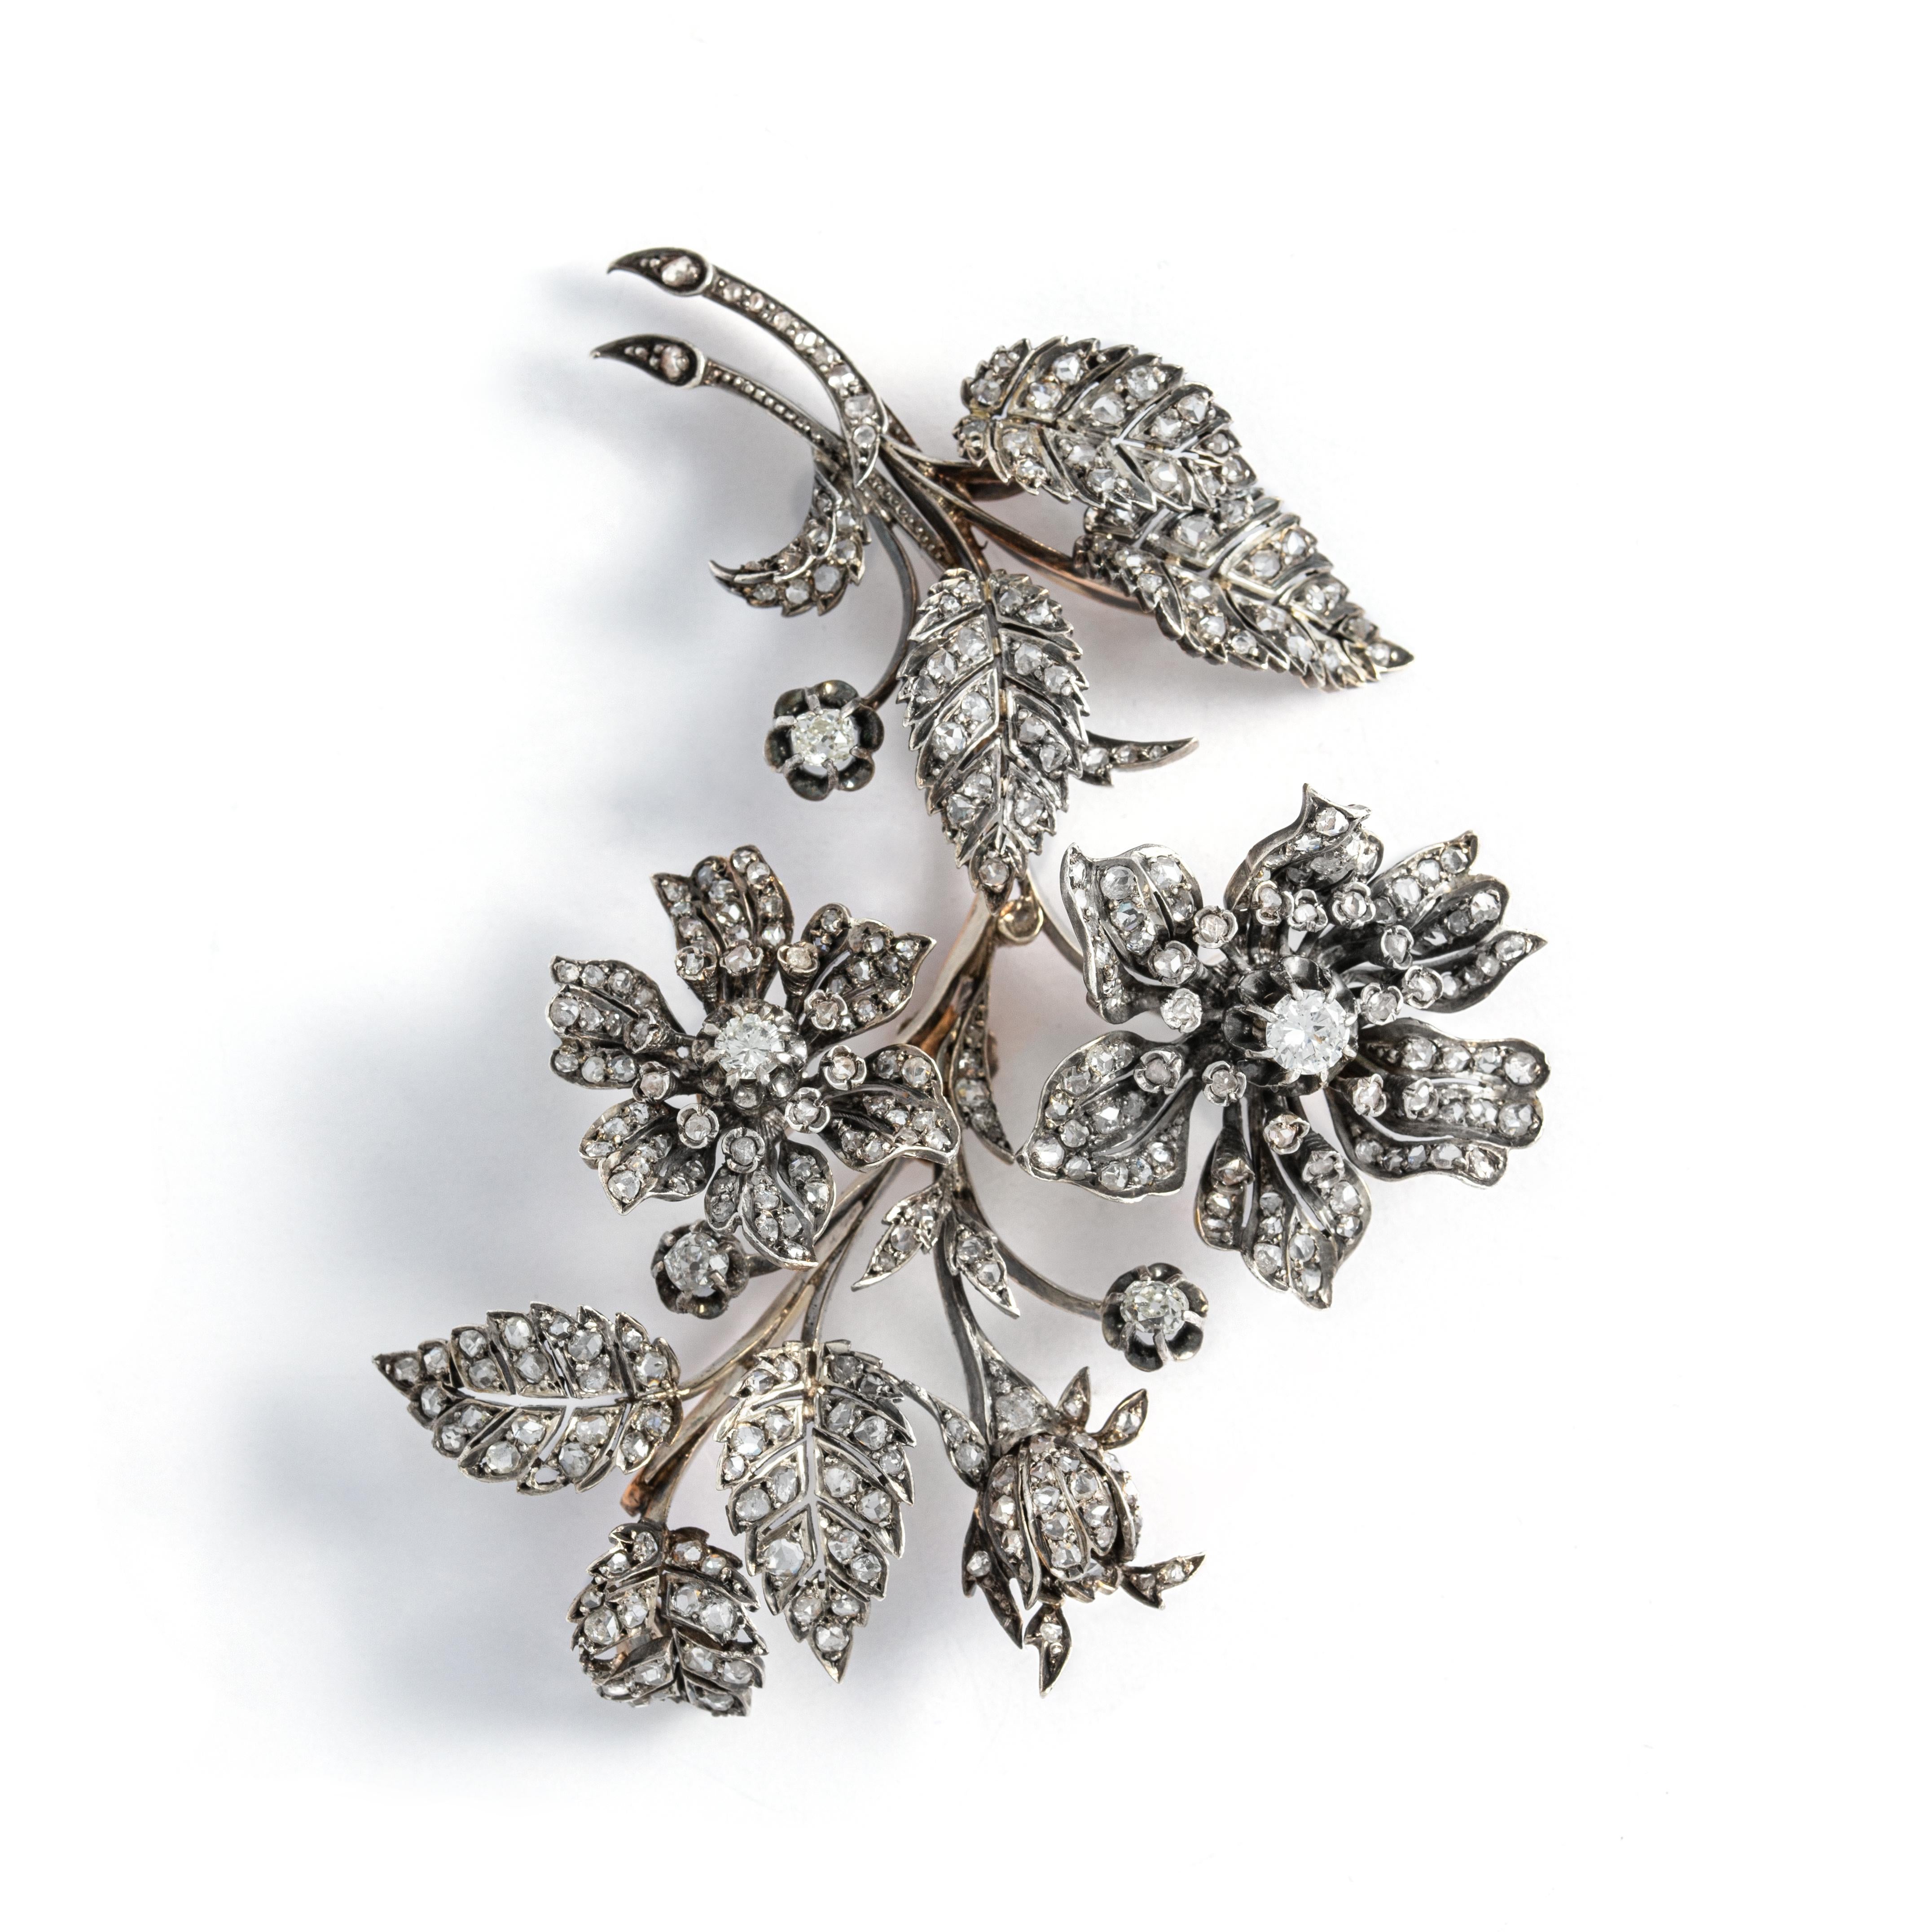 Tiara Convertible En Tremblant Flower Diamond Brooch In Excellent Condition For Sale In Geneva, CH